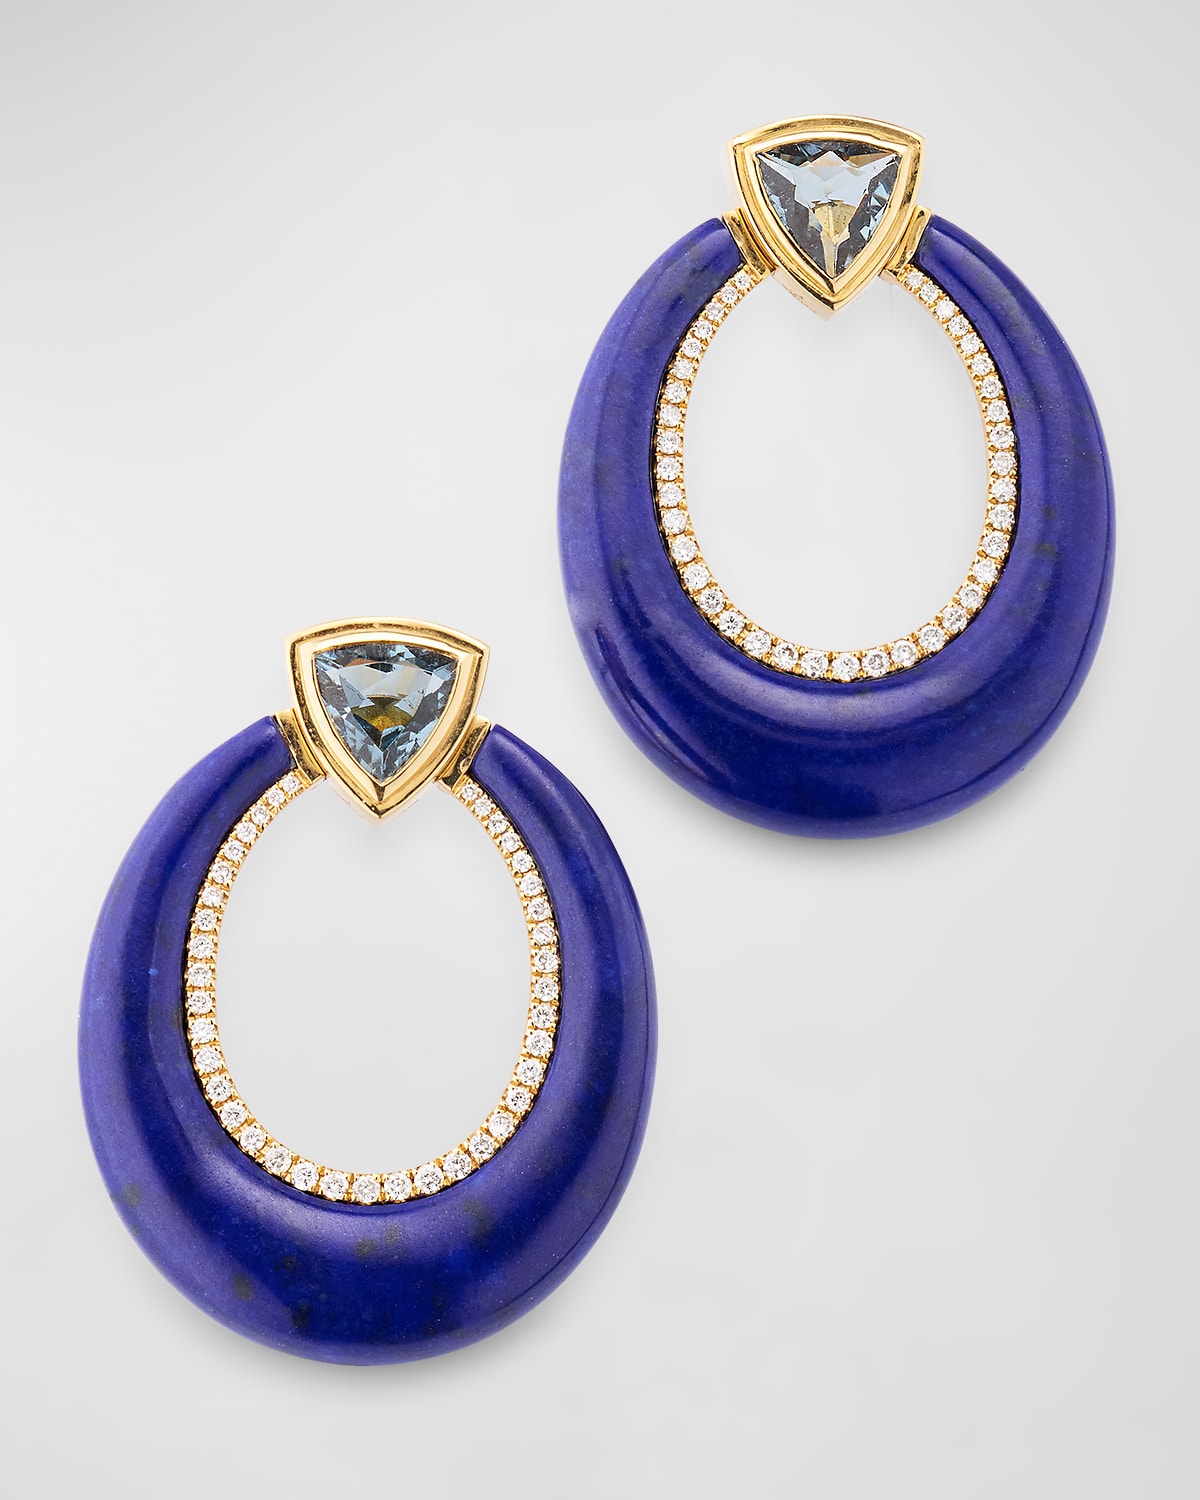 18K Yellow Gold Lapis and Blue Tourmaline Earrings with GH-SI Diamonds